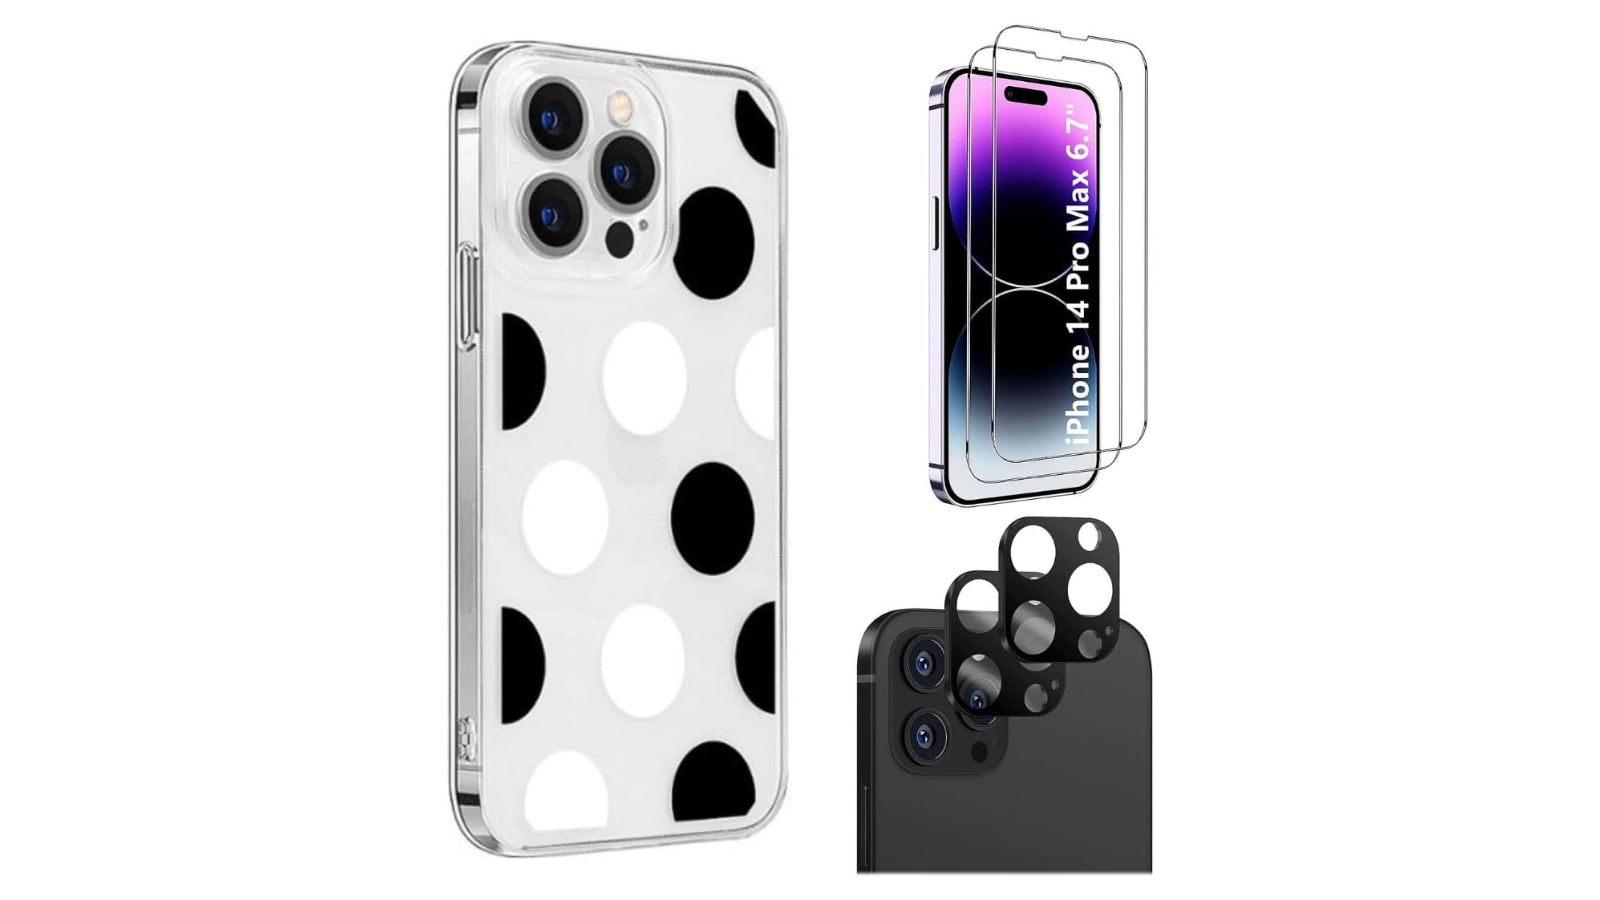 SaharaCase iPhone 14 Pro Max Protection Kit Bundle - Polkadot Hybrid-Flex Hard Shell Case with Tempered Glass Screen and Camera Protector (Clear/Black/White)